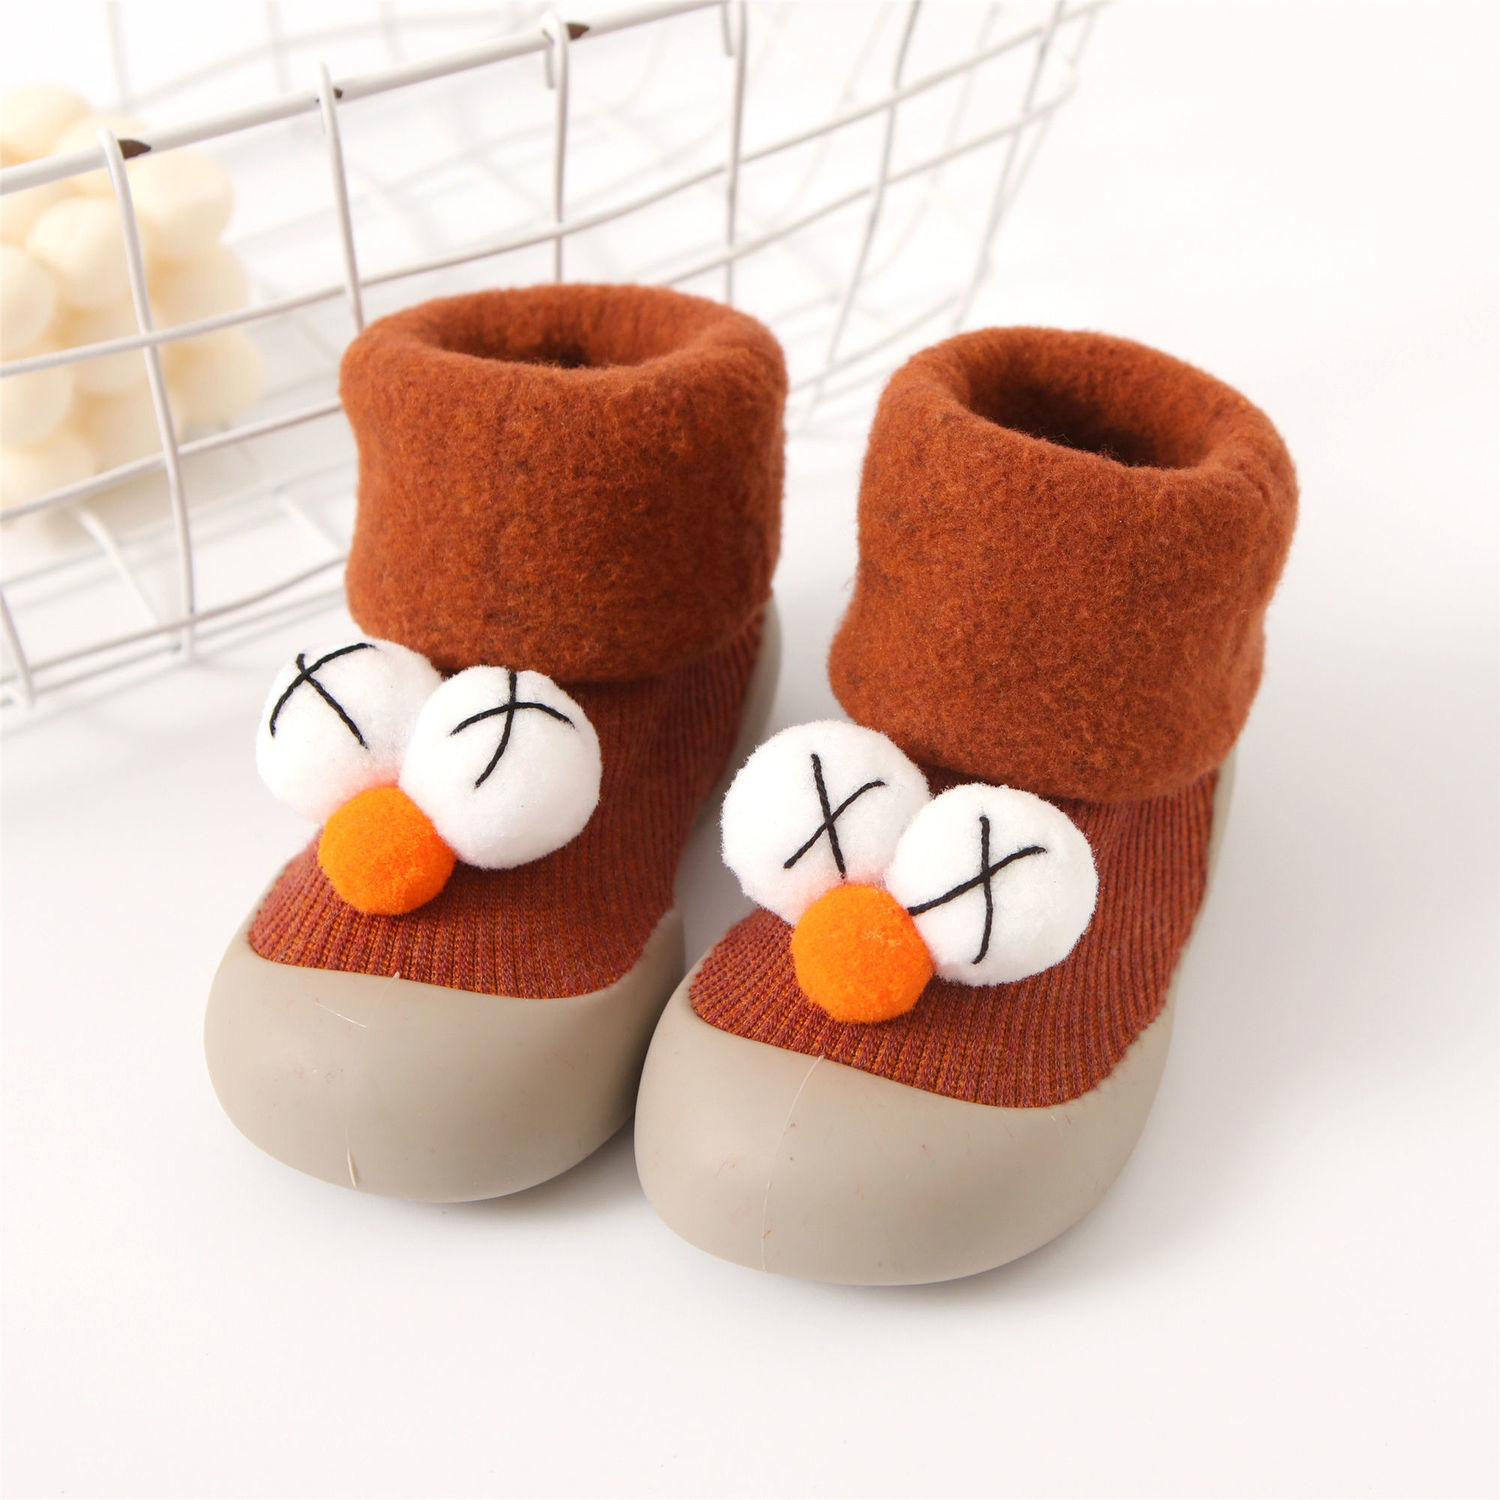 [Plus velvet and thick] winter new men and women baby toddler shoes non-slip soft bottom anti-drop shoes baby floor shoes